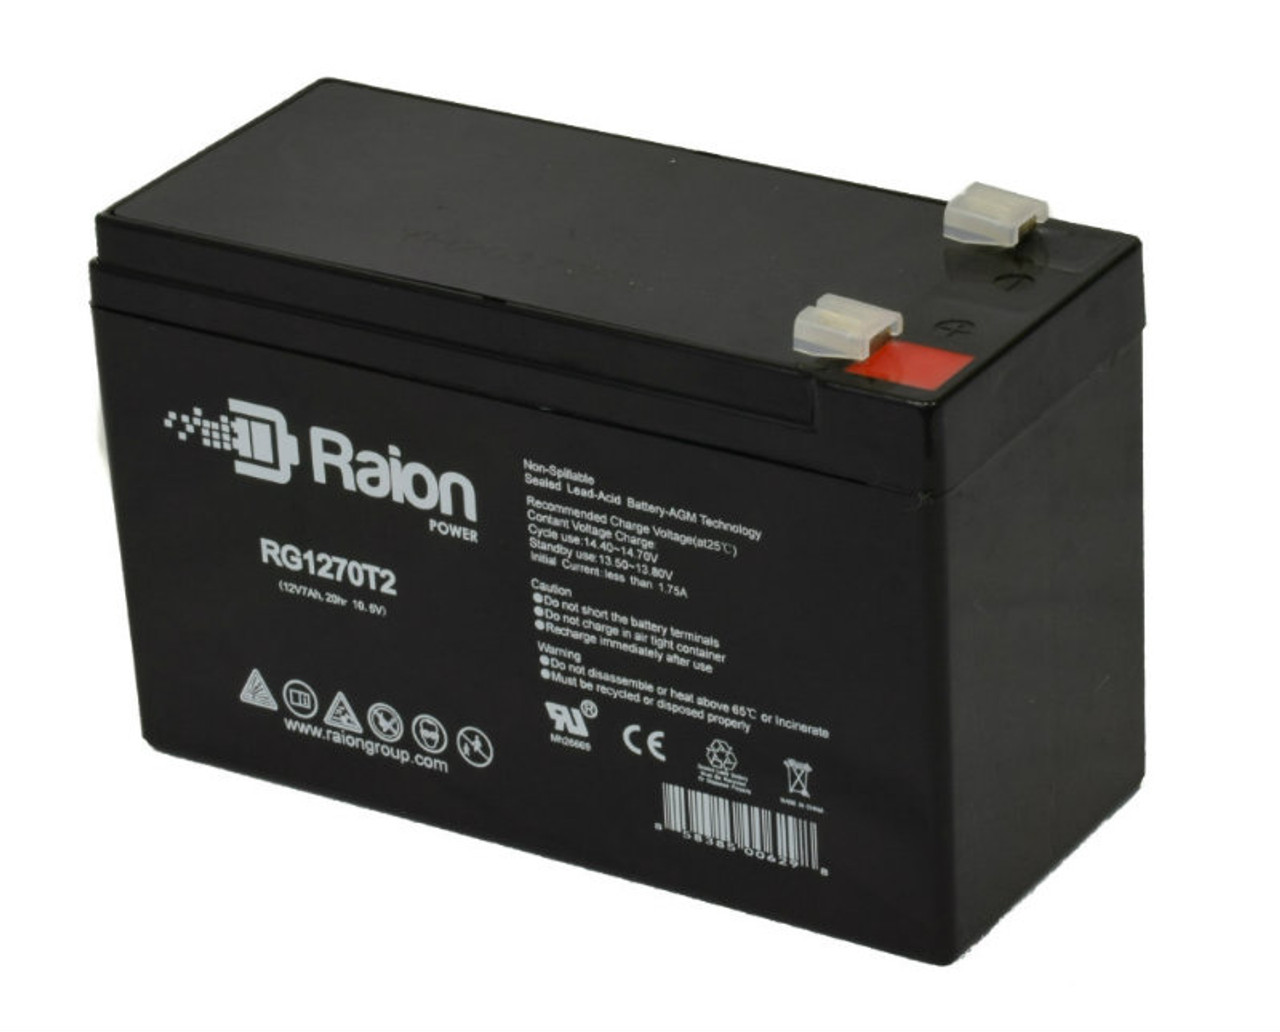 Raion Power RG1270T1 12V 7Ah Non-Spillable Replacement Battery for Hitachi GP6512